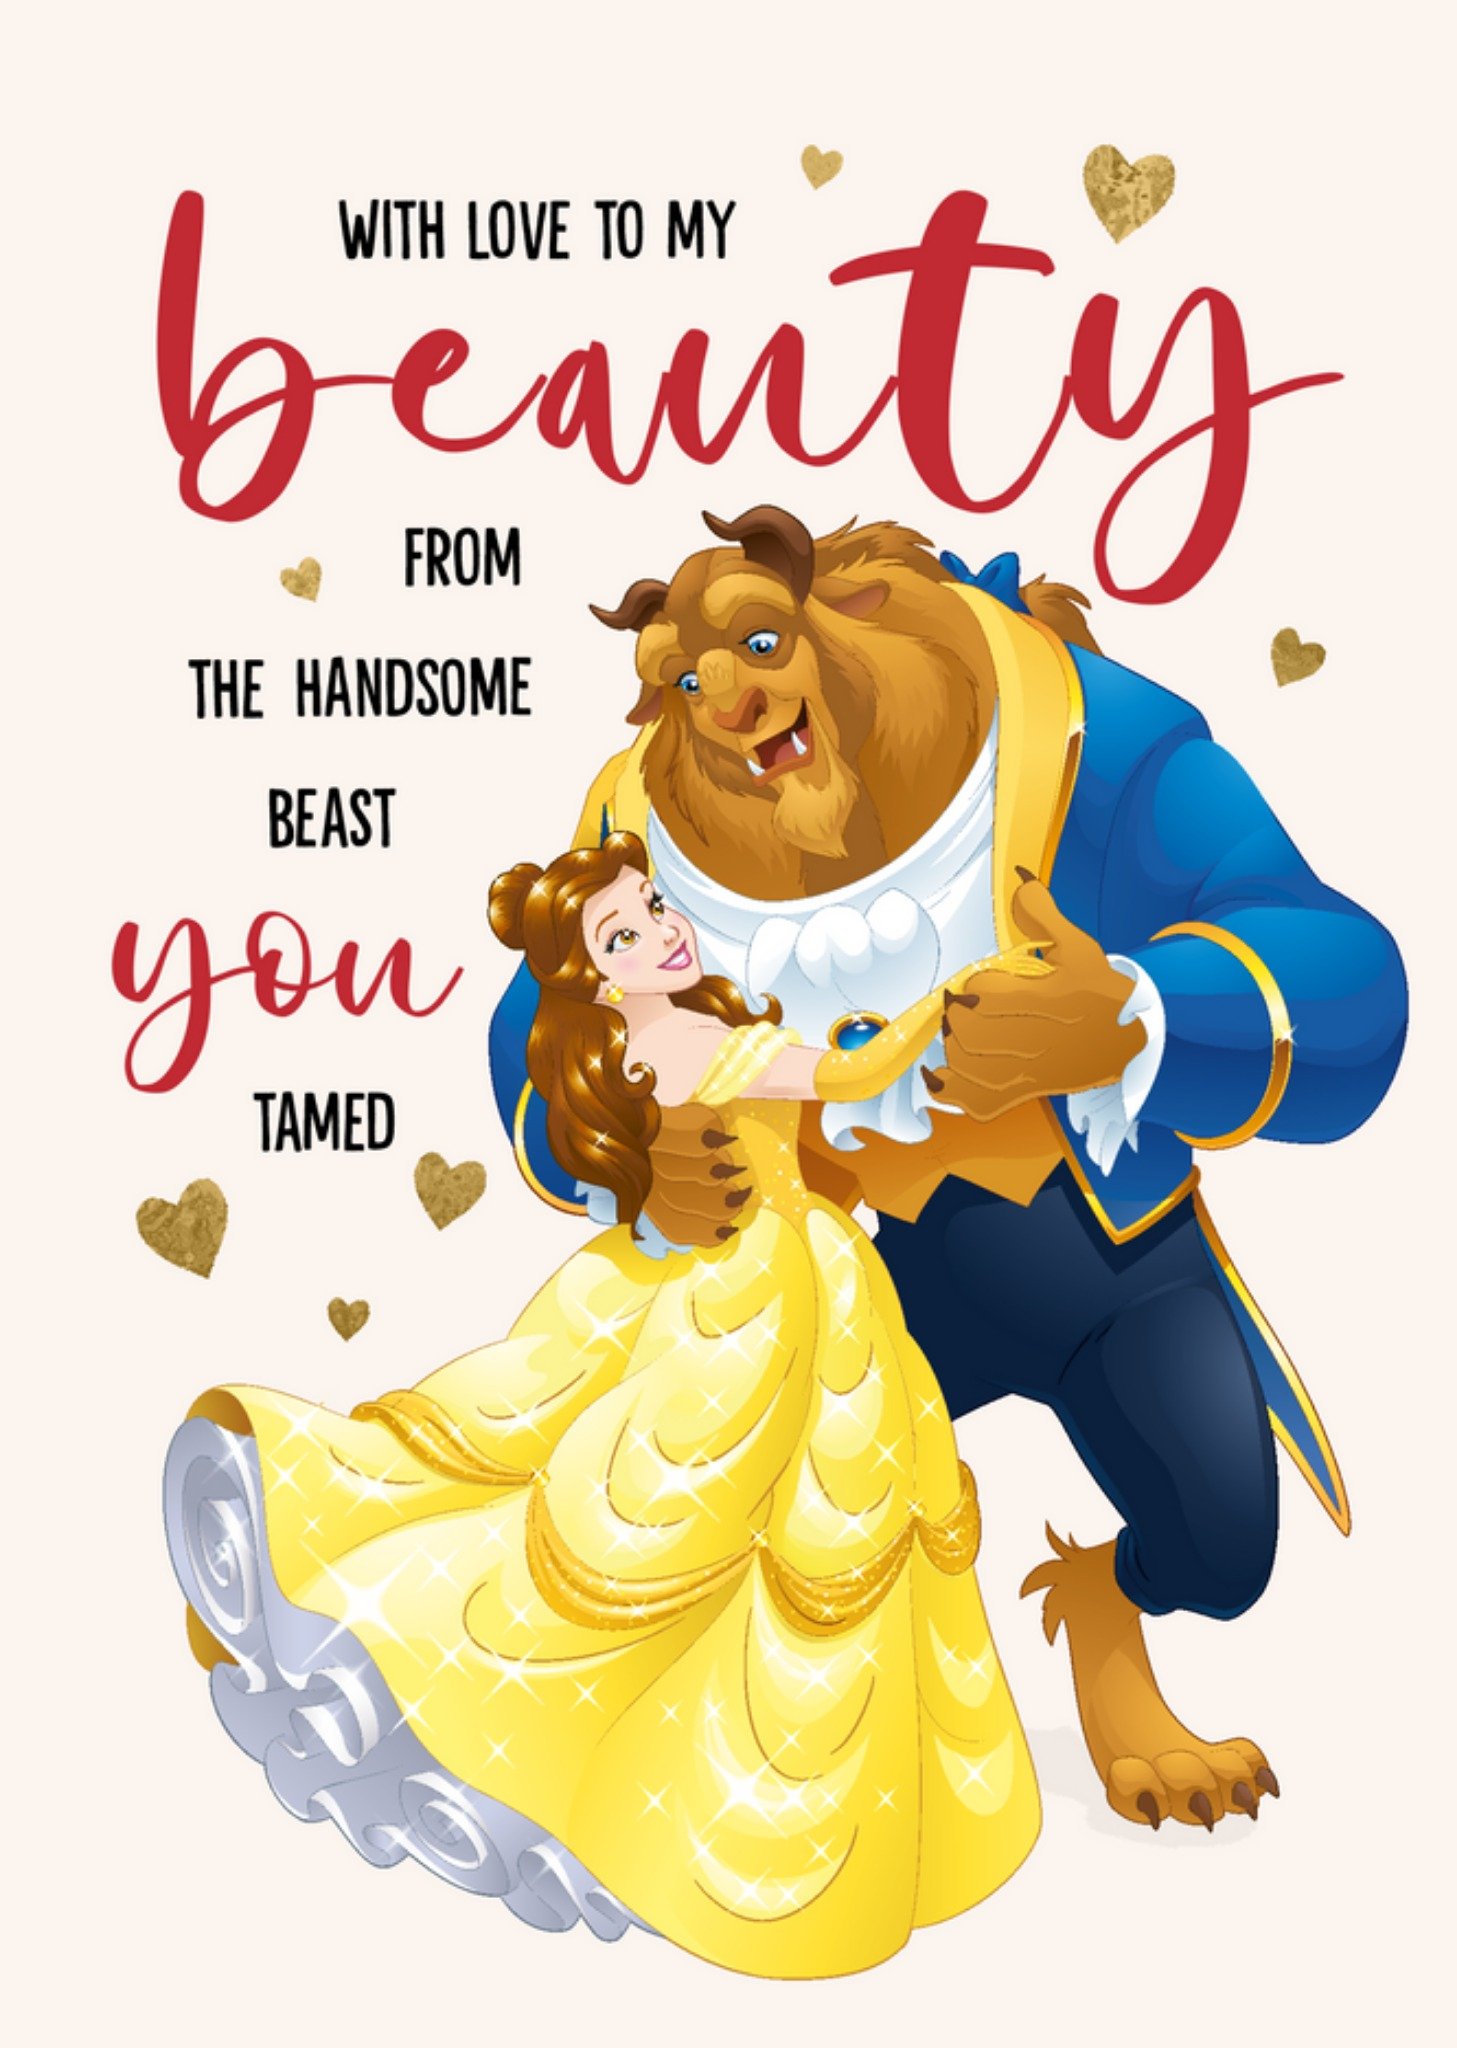 Disney Beauty And The Beast With Love To My Beauty Card, Large